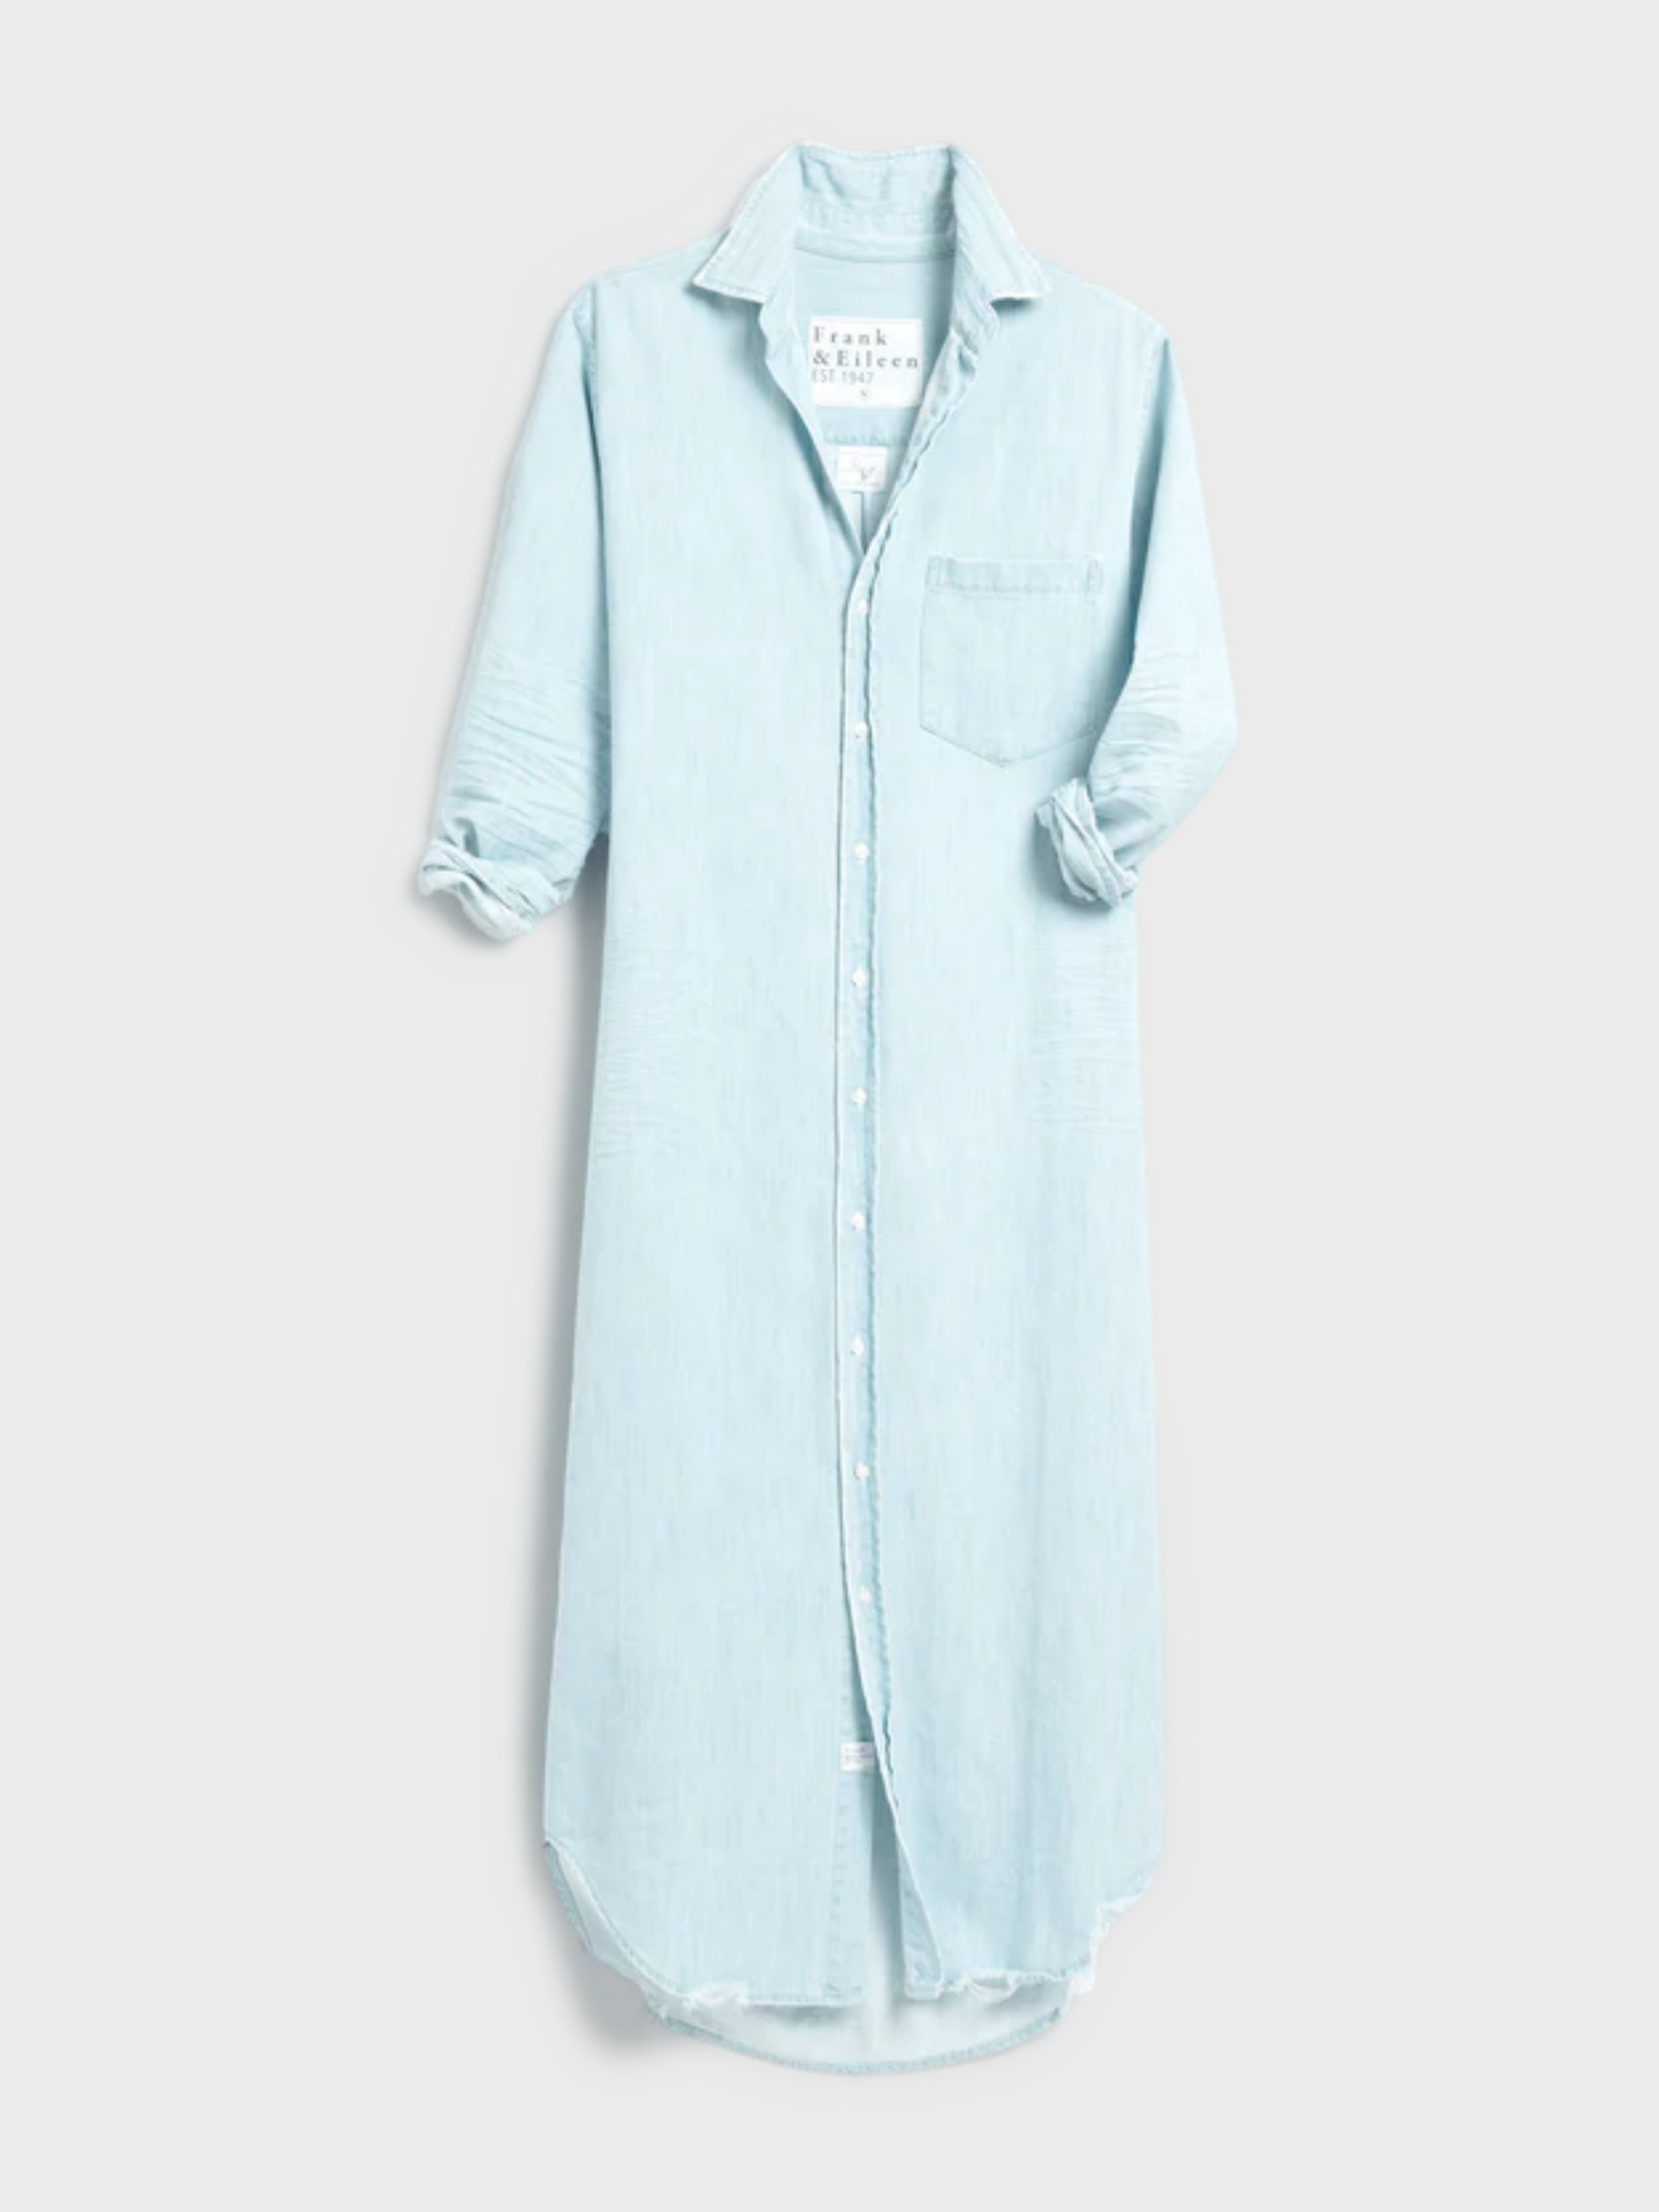 Frank & Eileen Rory Maxi Shirtdress- Classic Blue Tattered Wash-Dresses-West of Woodward Boutique-Vancouver-Canada